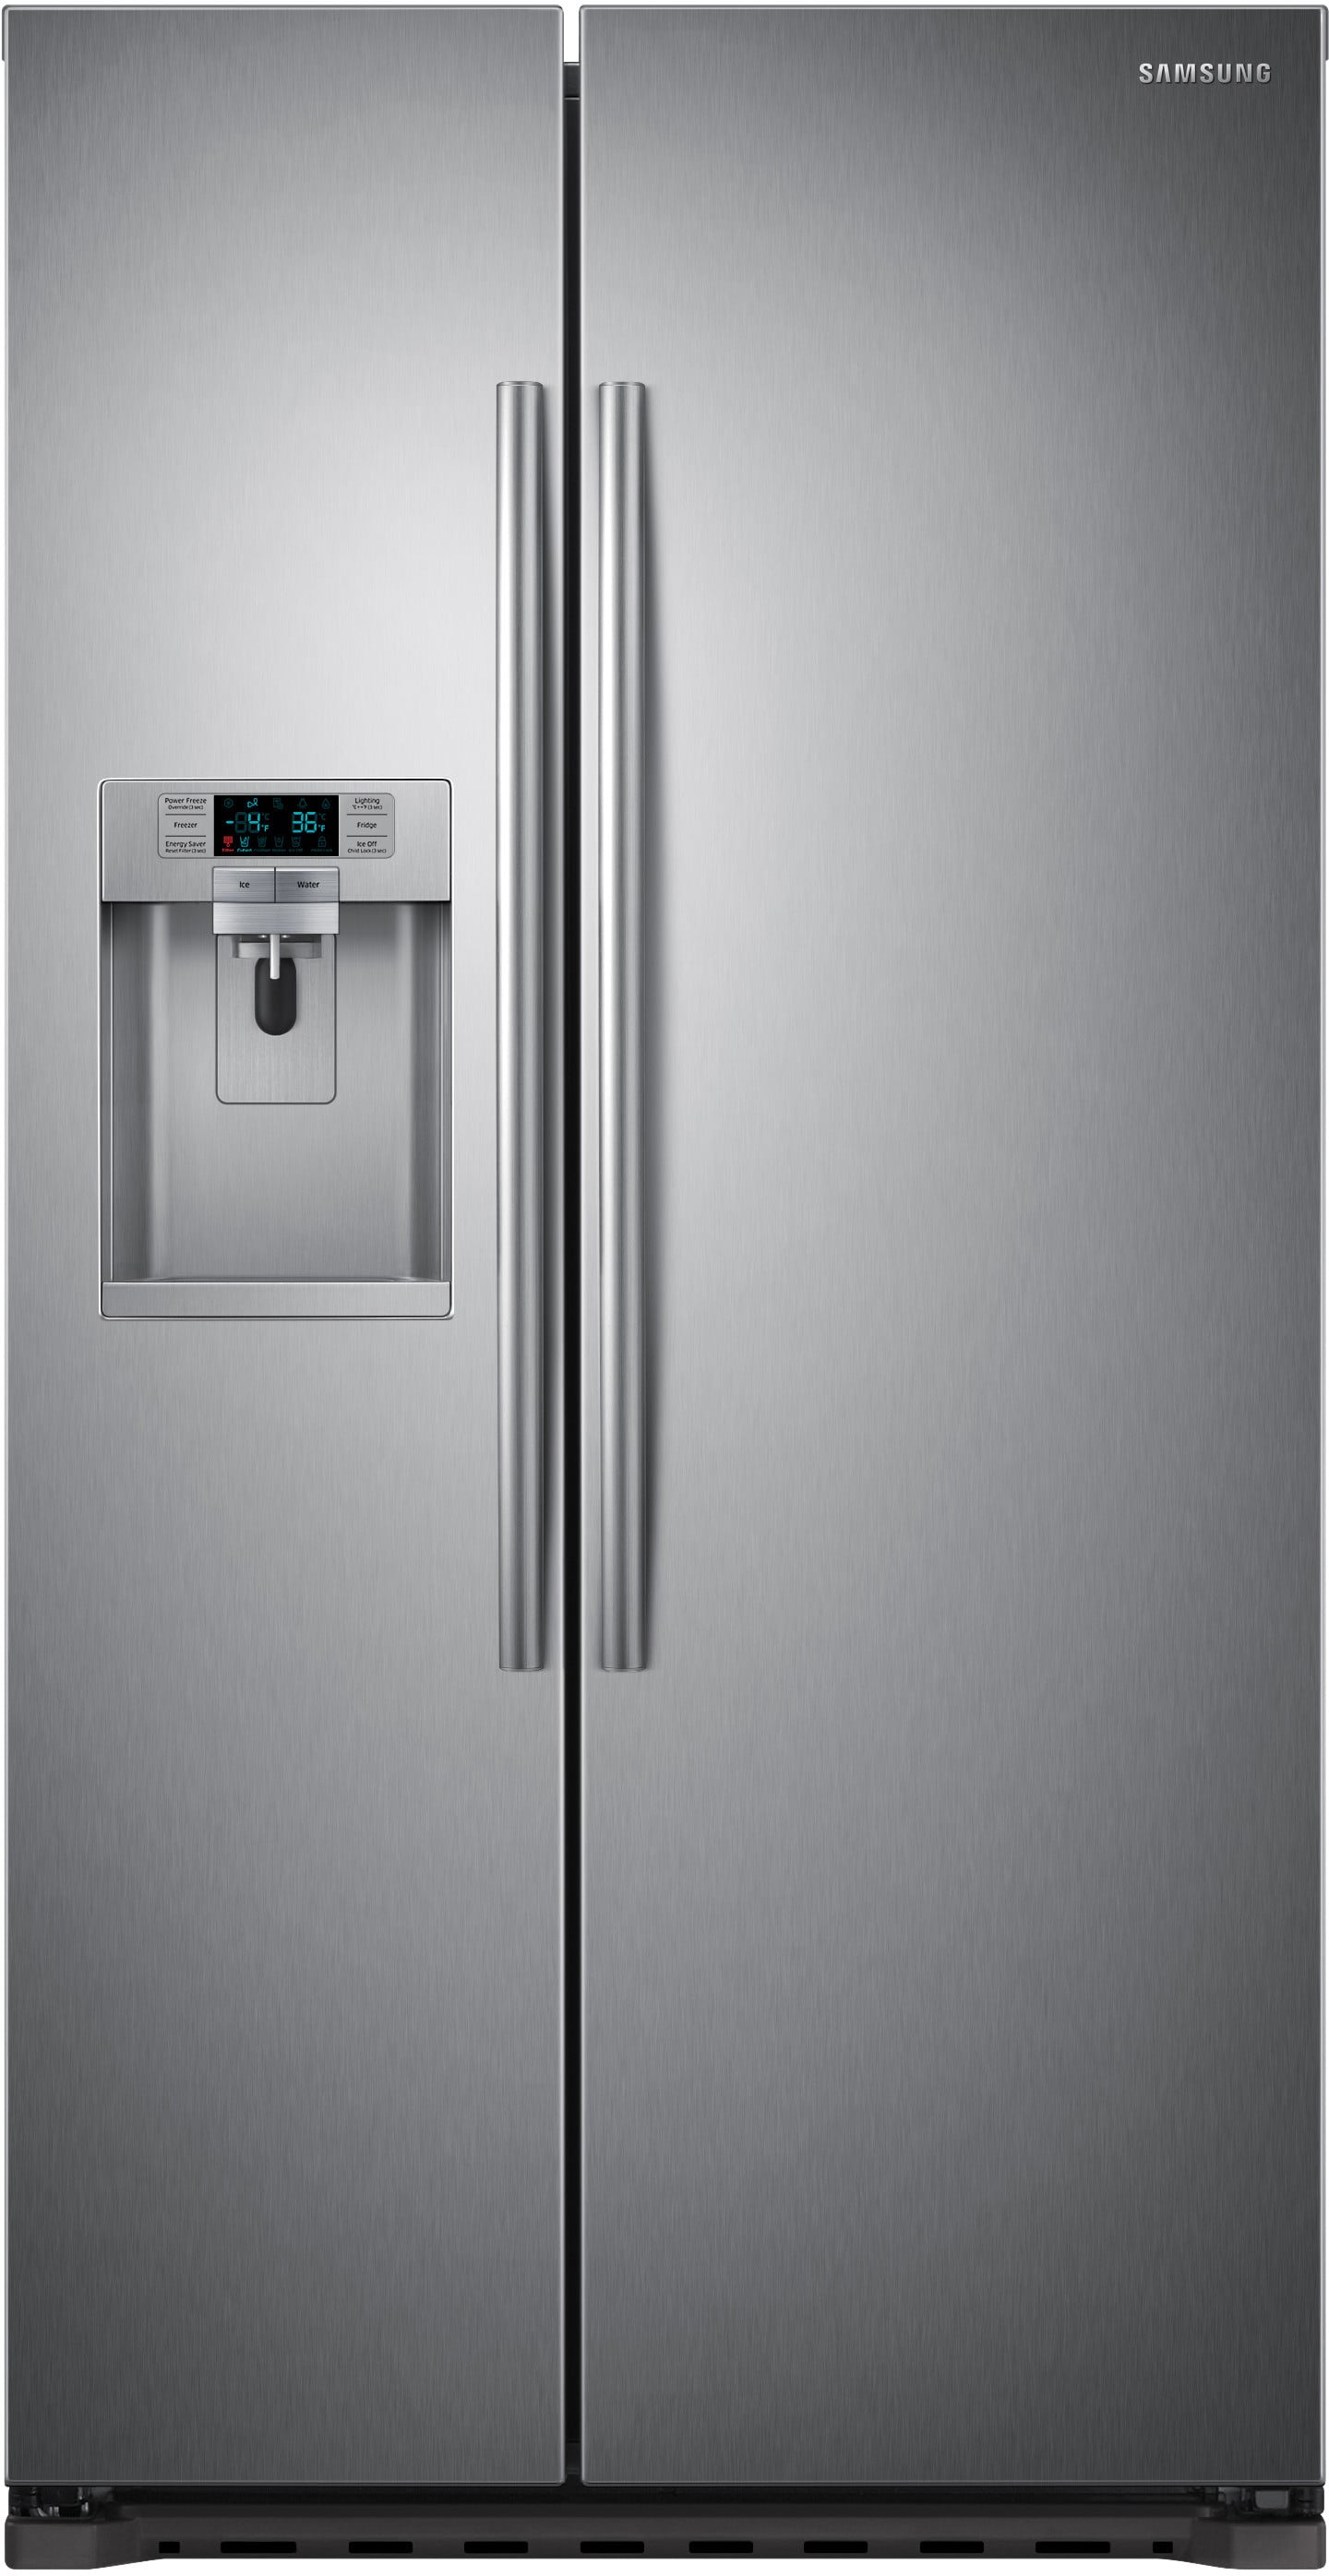 Samsung RS22HDHPNSR 36 Inch Counter Depth Side by Side Refrigerator